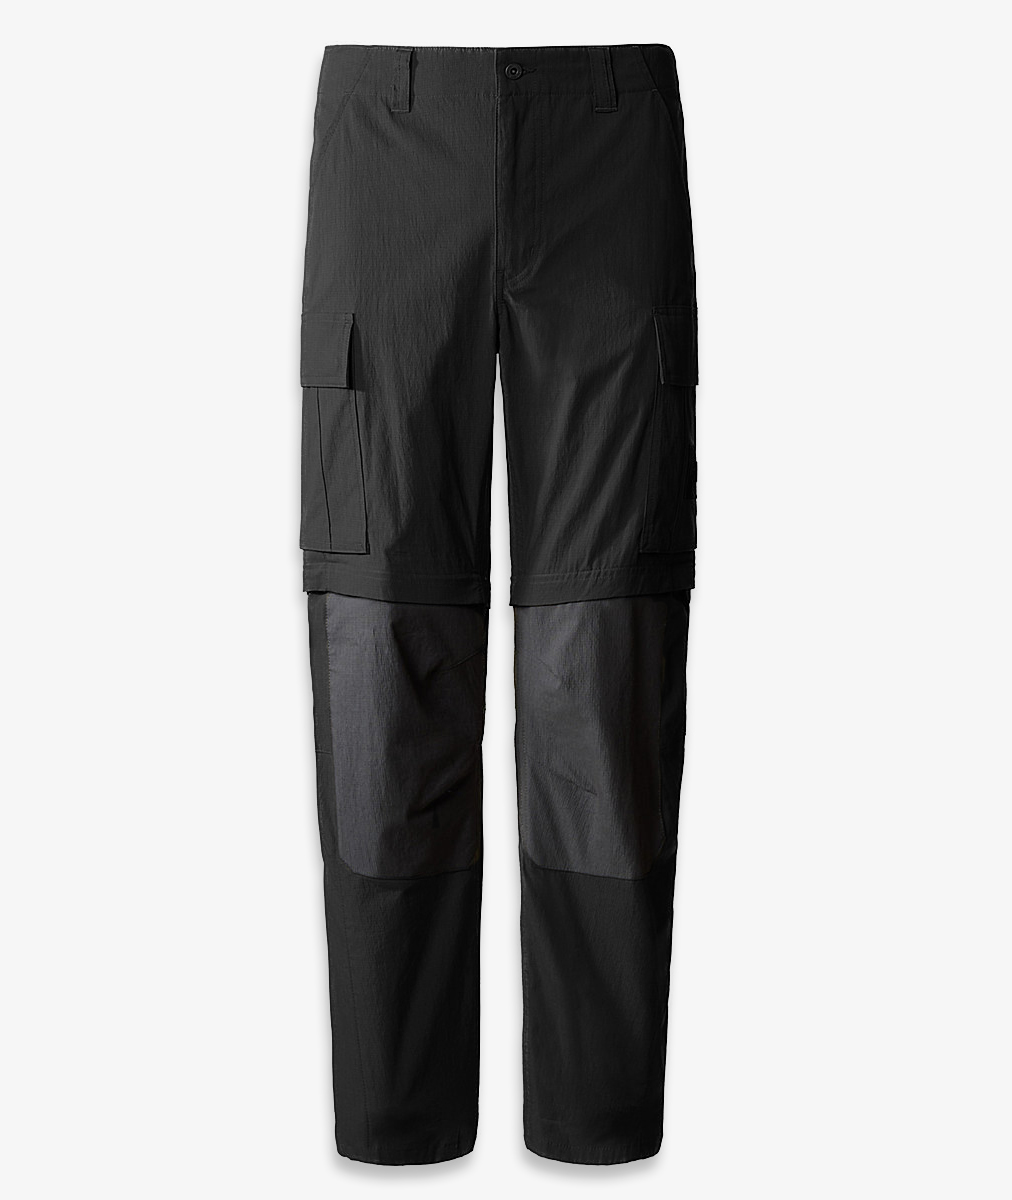 7 Best Convertible Hiking Pants For All-Season Adventures!